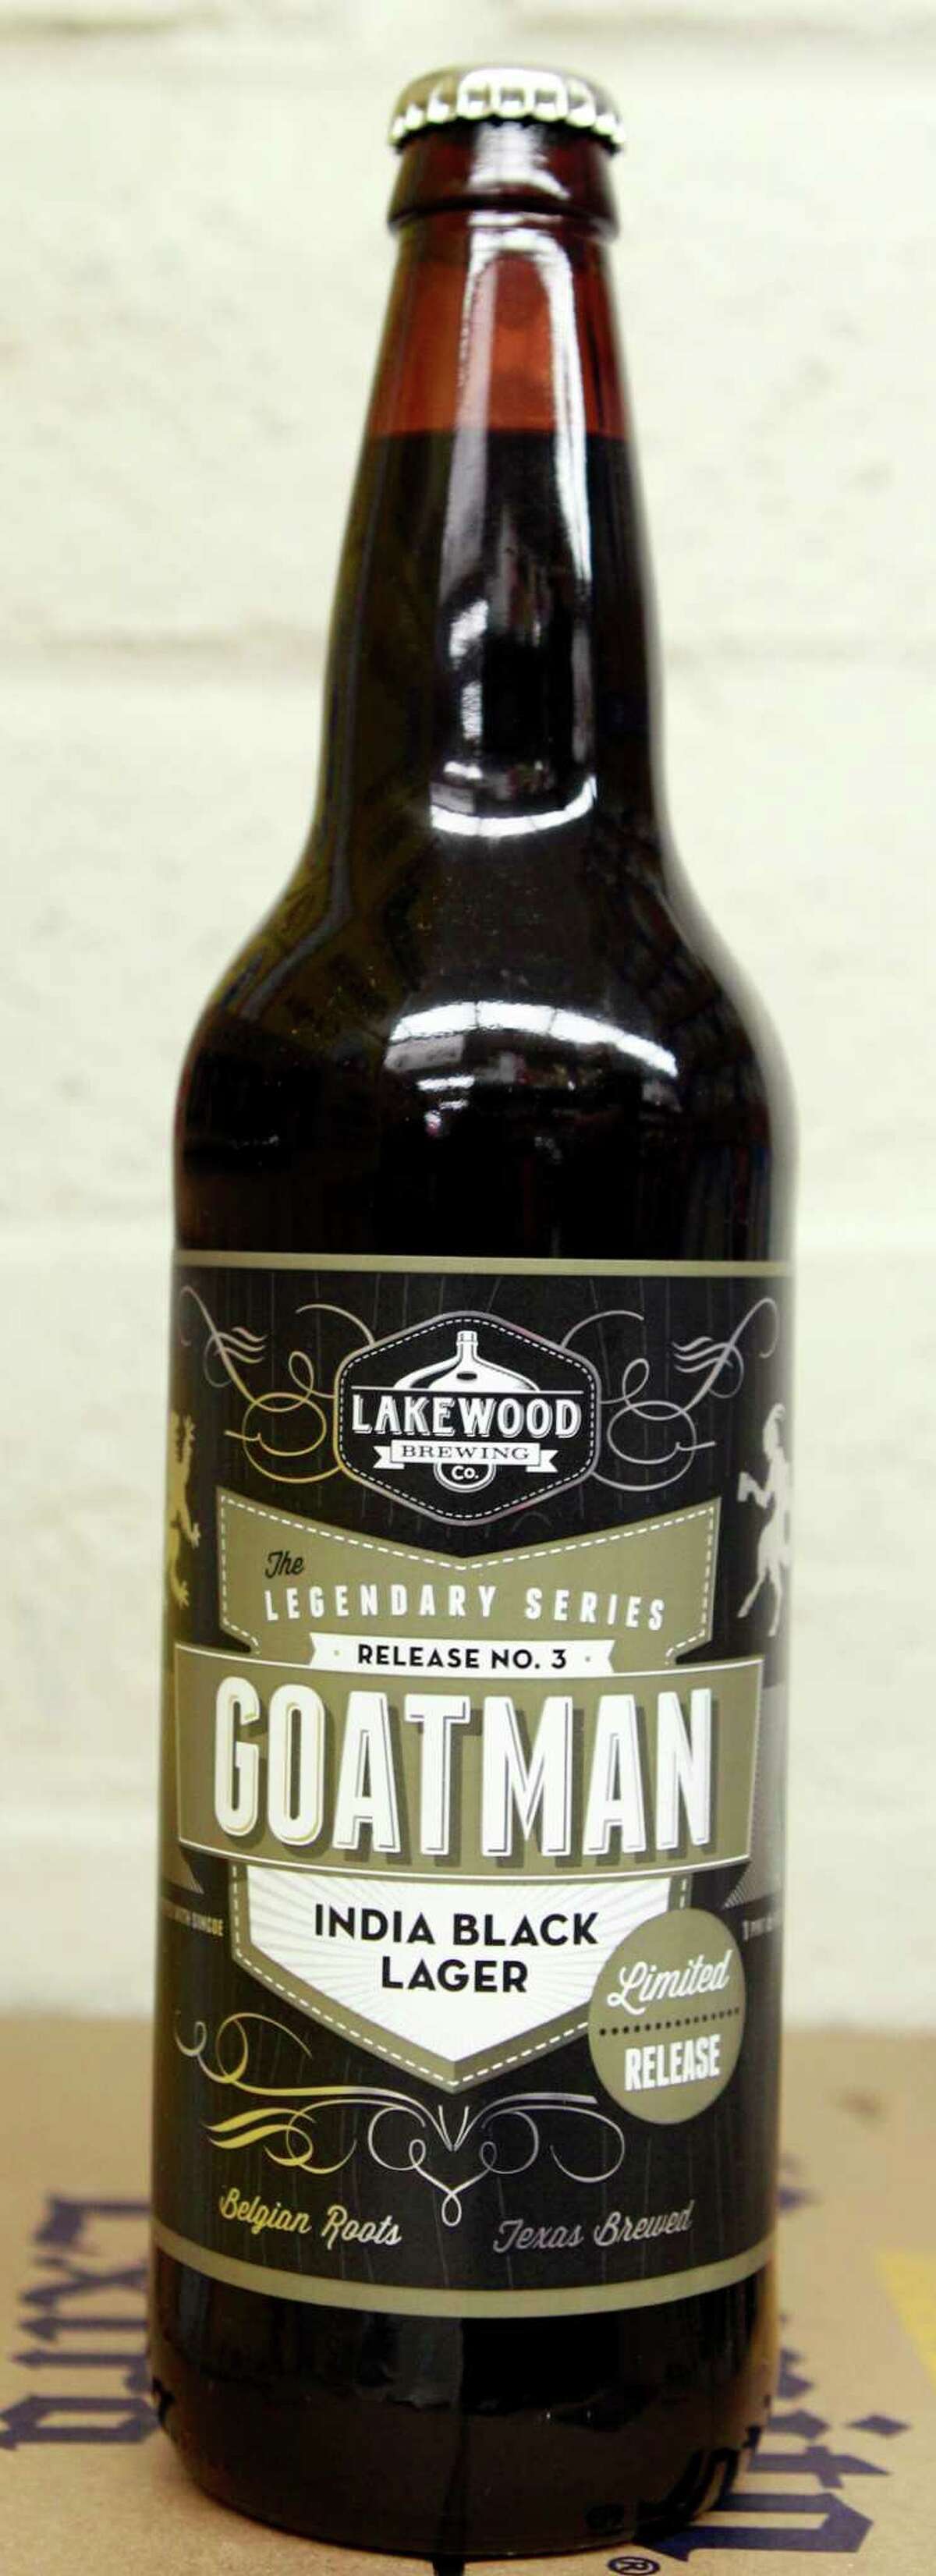 Goatman brewed by Lakewood Brewing Company is shown Friday, Feb. 21, 2014, in Houston. Joey Williams is the beer department manager at Spec's. ( Melissa Phillip / Houston Chronicle )